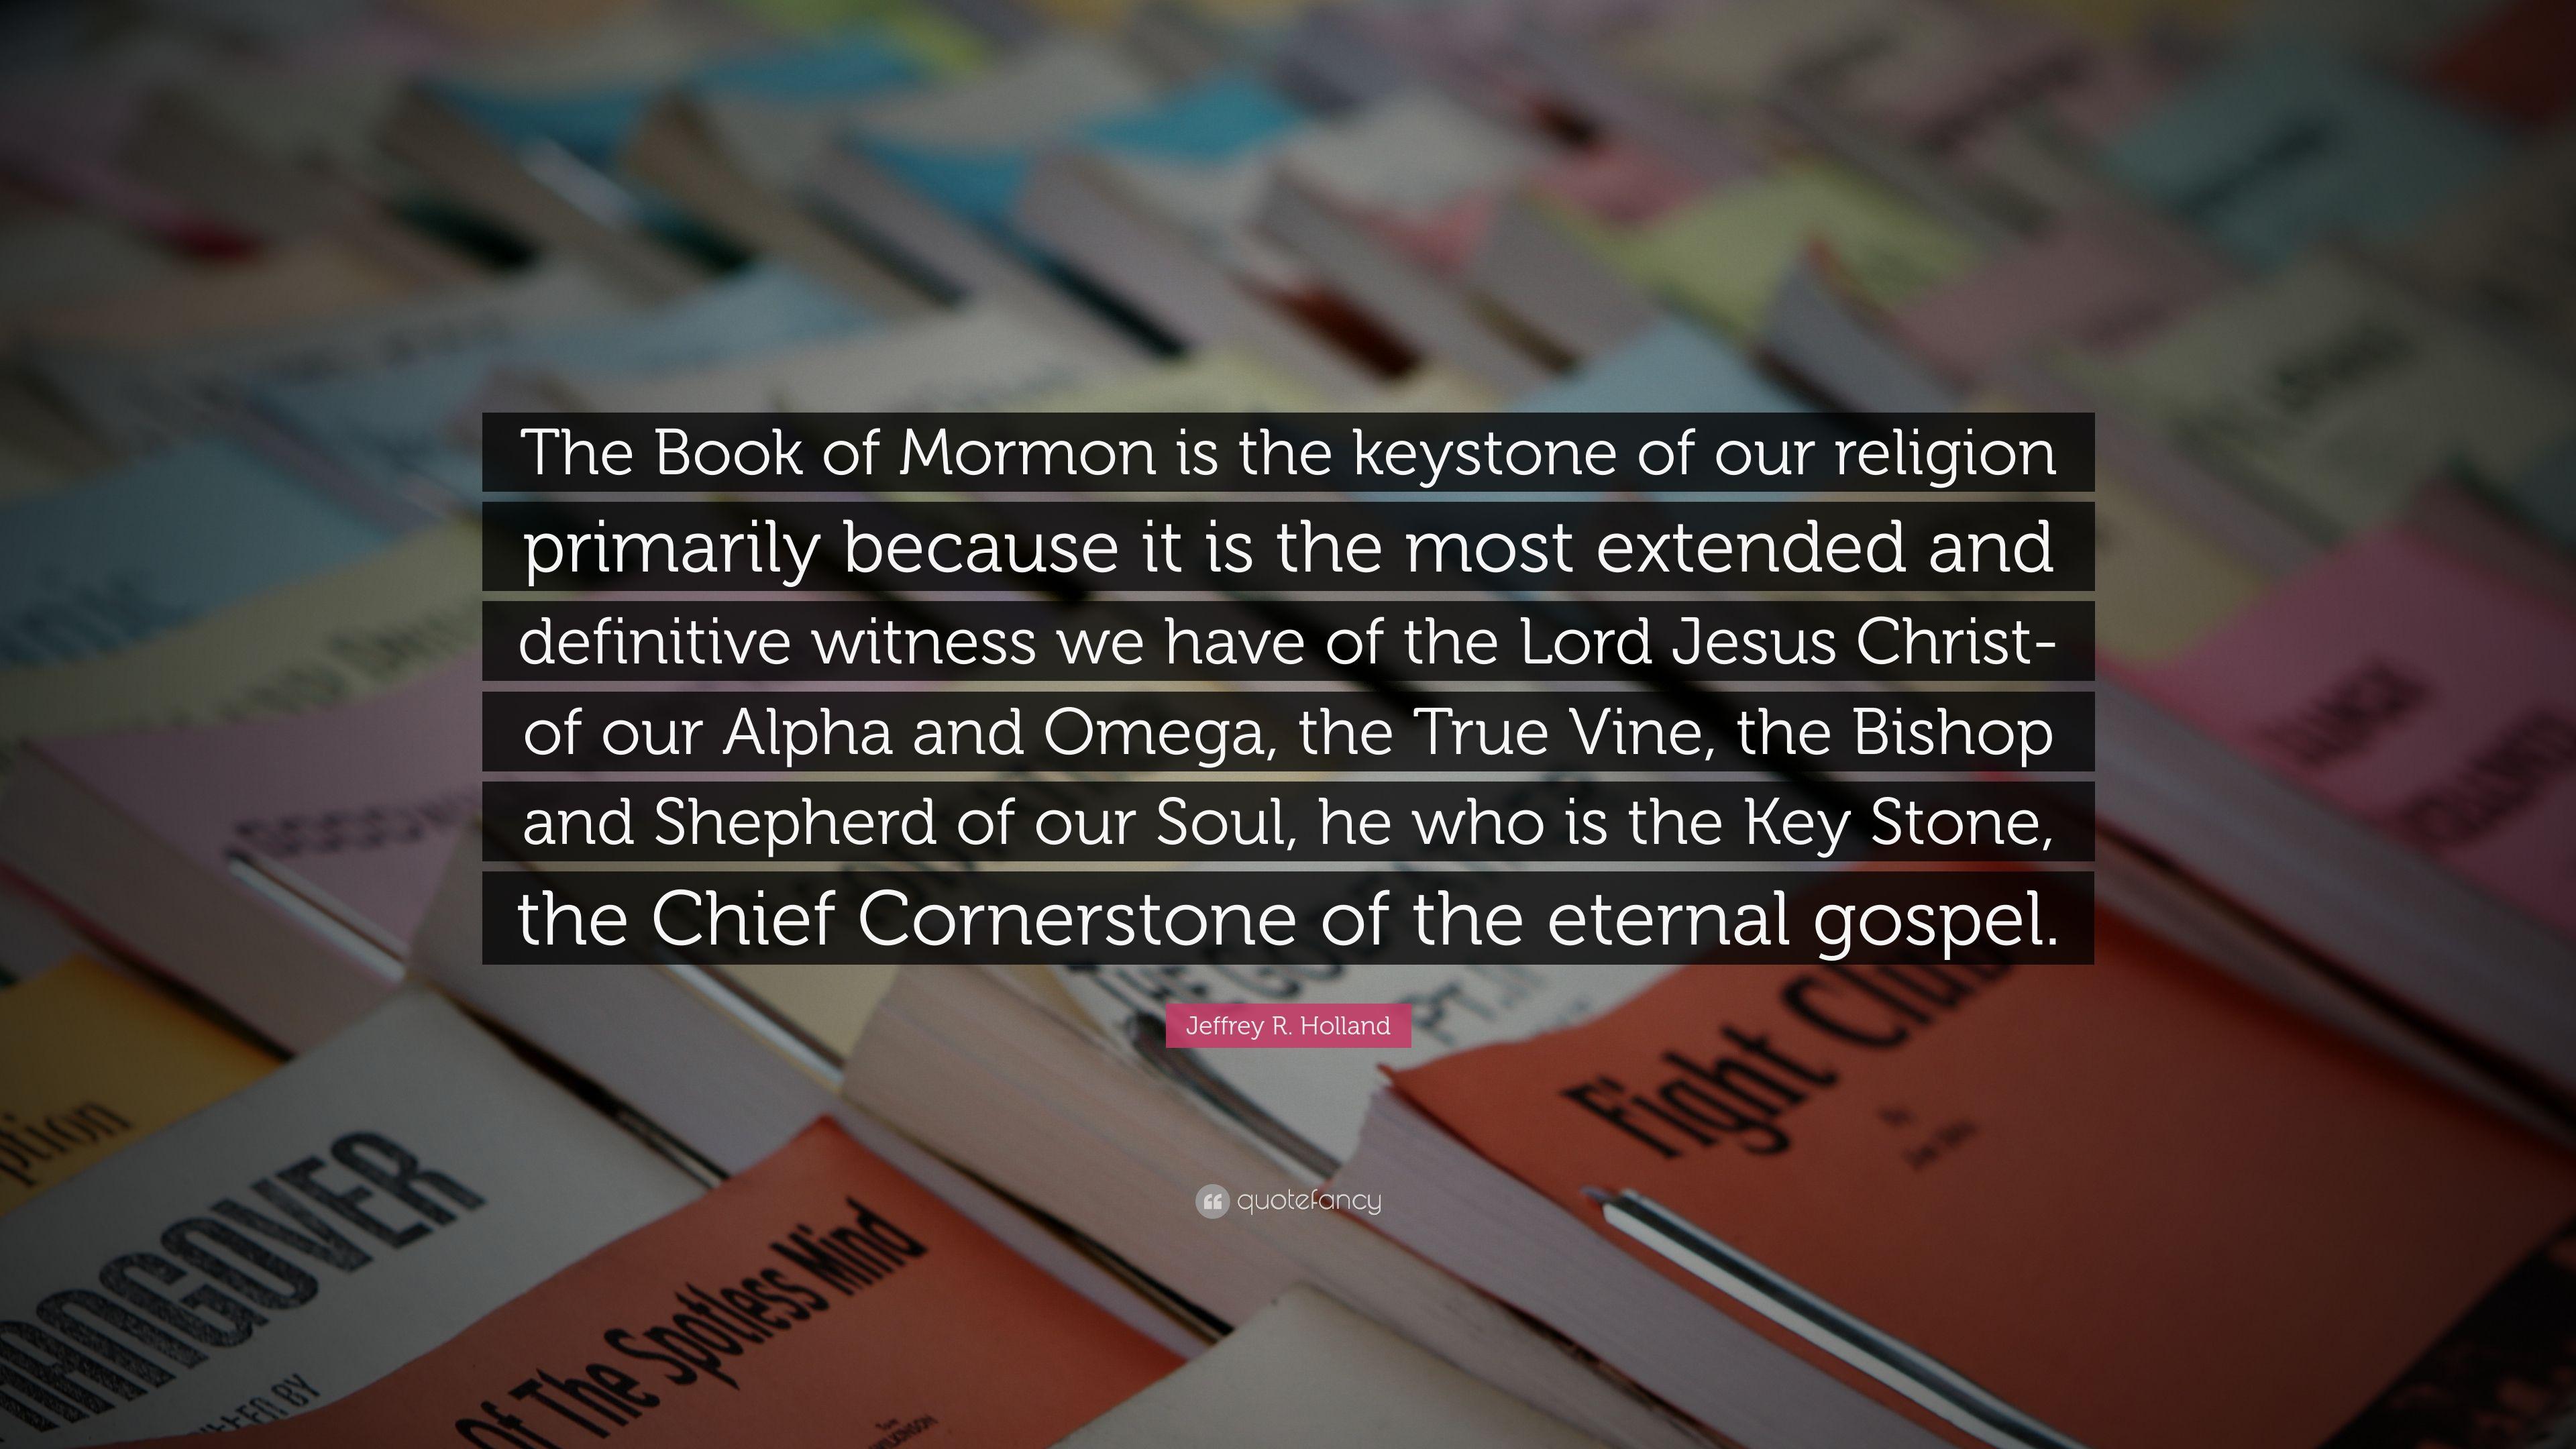 Jeffrey R. Holland Quote: “The Book of Mormon is the keystone of our